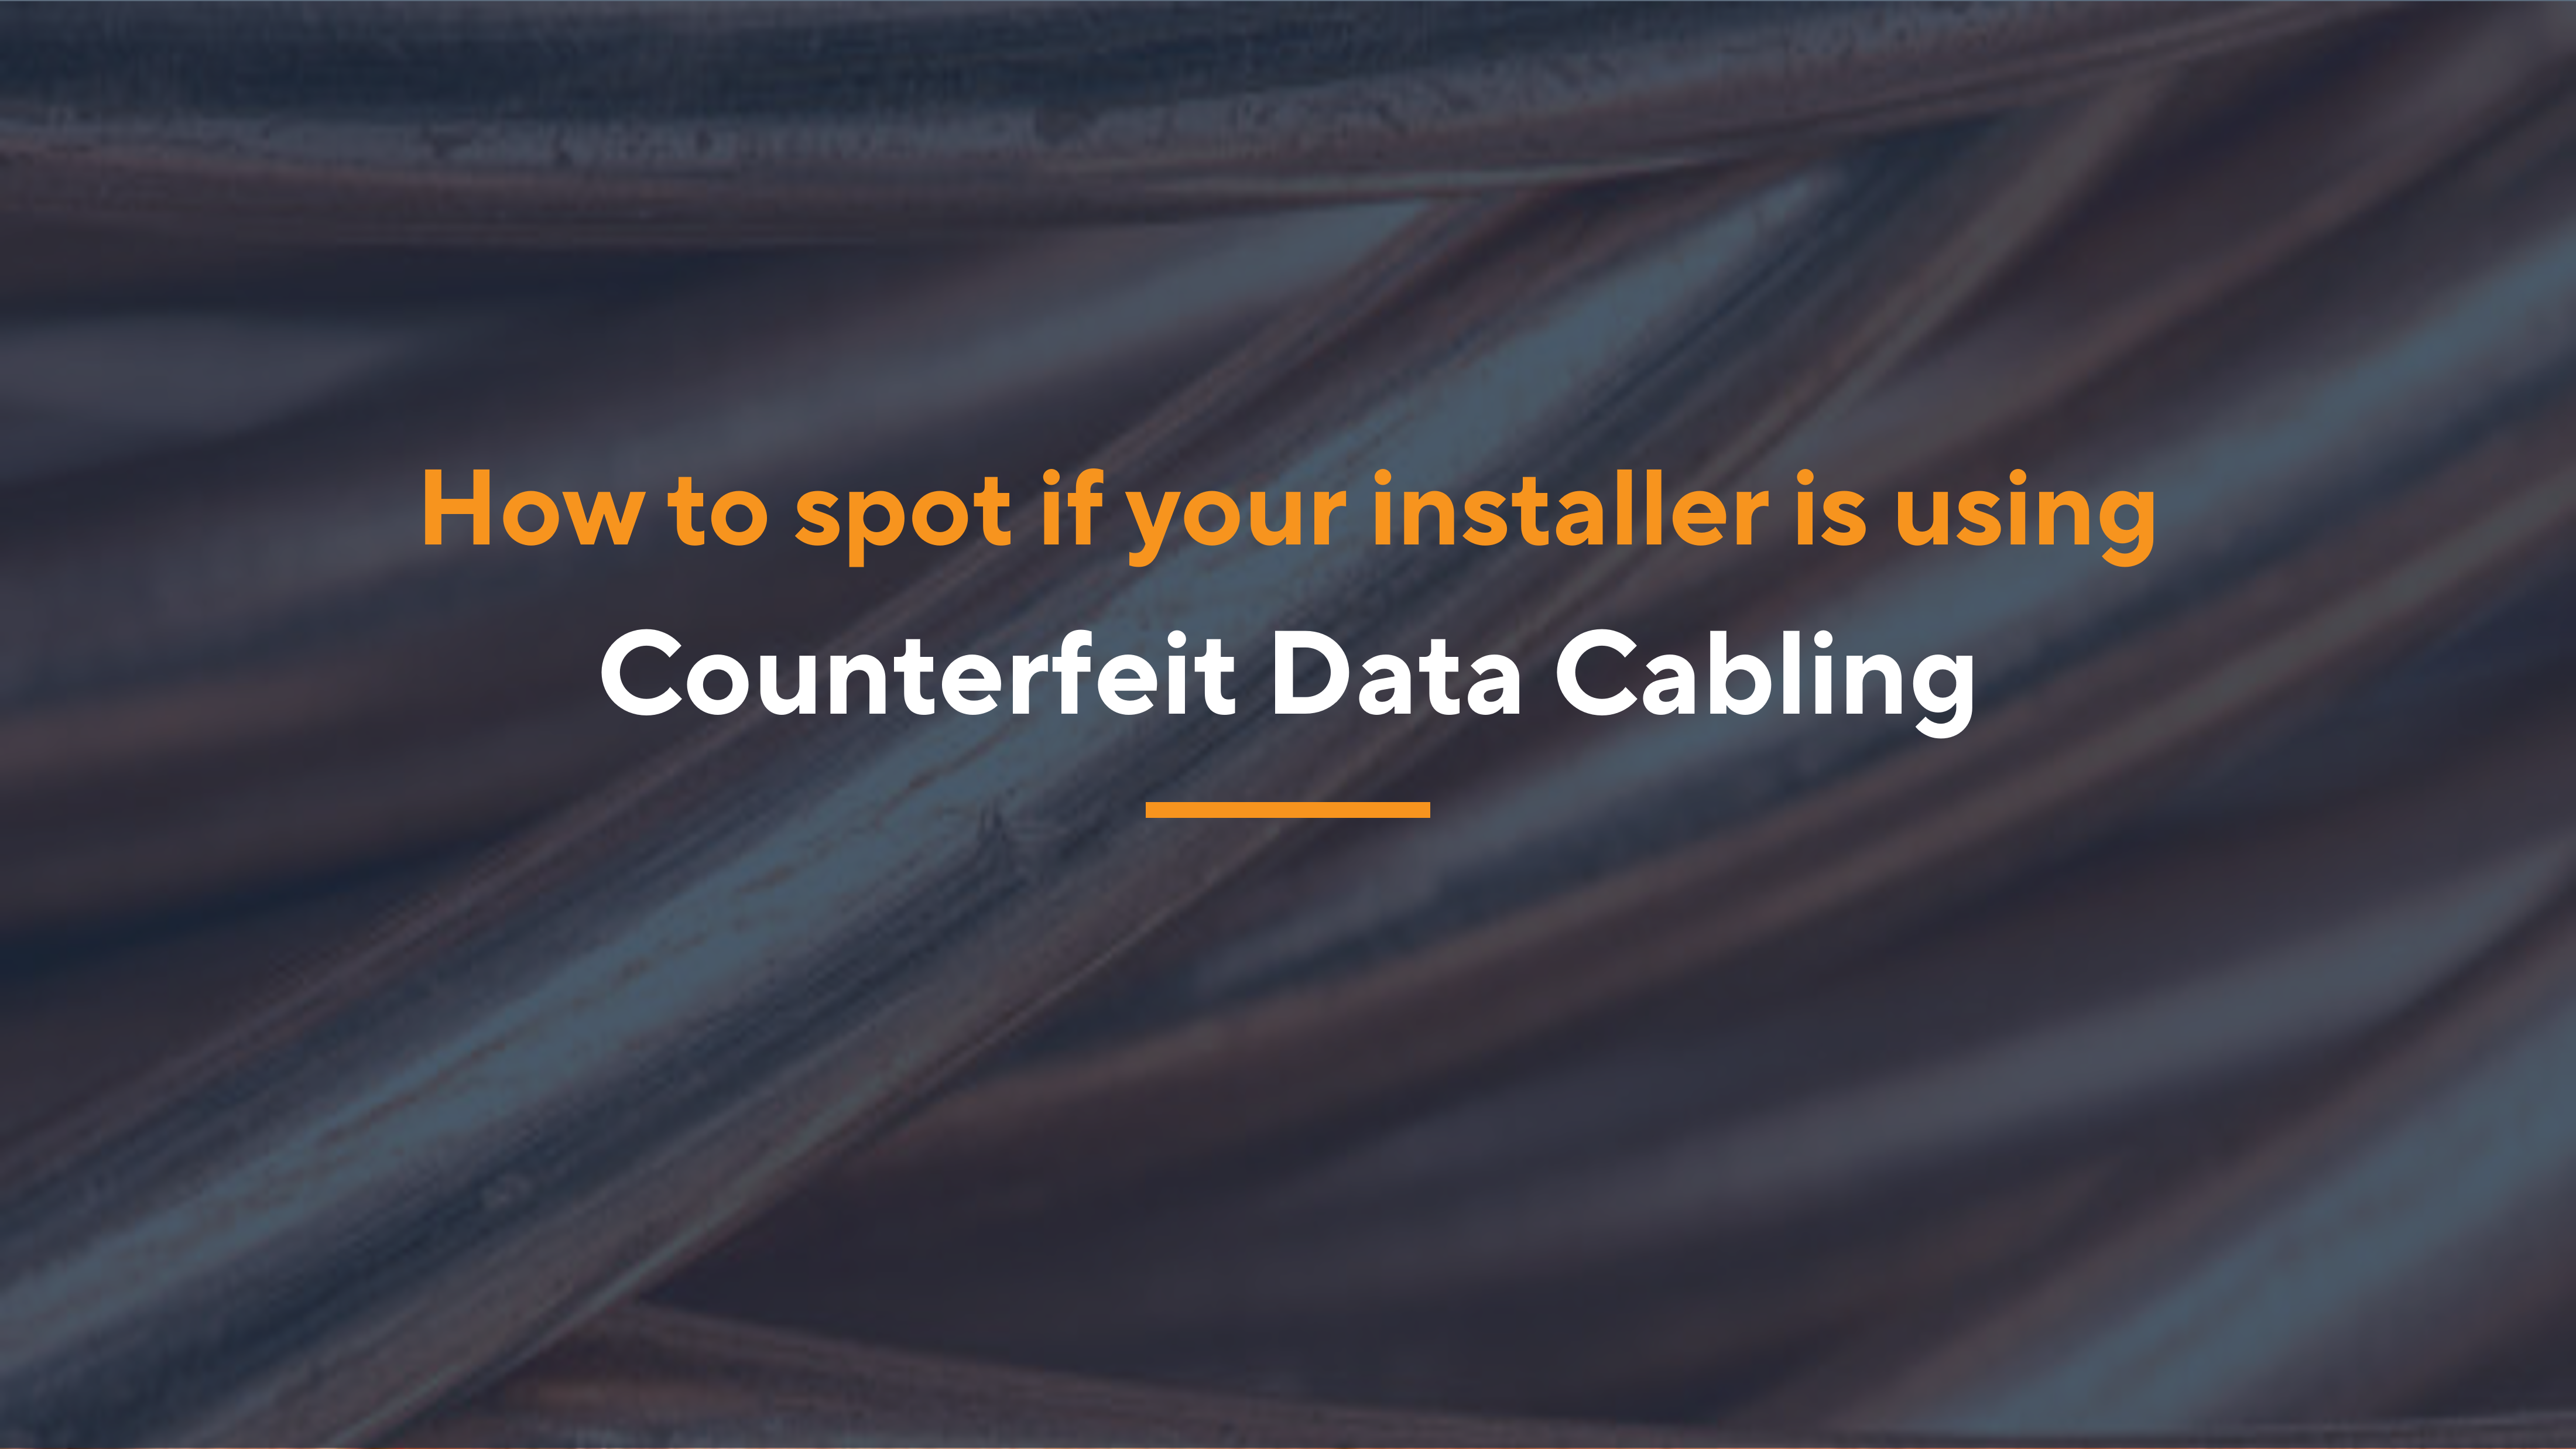 Copper Clad Aluminum (CCA) - How to Spot If Your Installer is Using Counterfeit Data Cabling